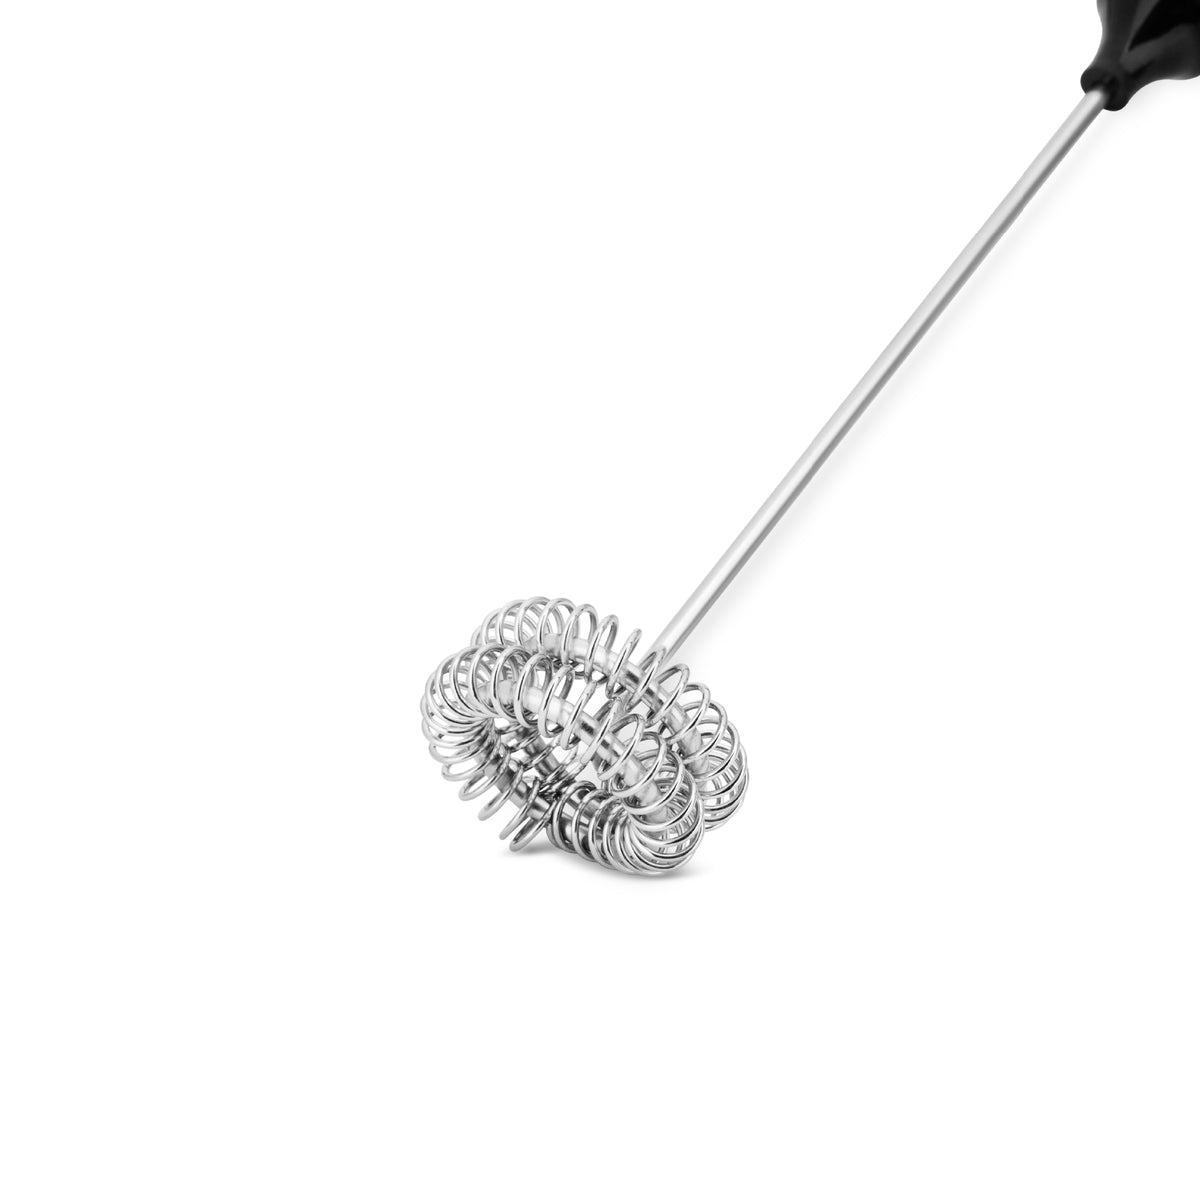 Smaller attachment of the EspressoWorks Handheld Milk Frother